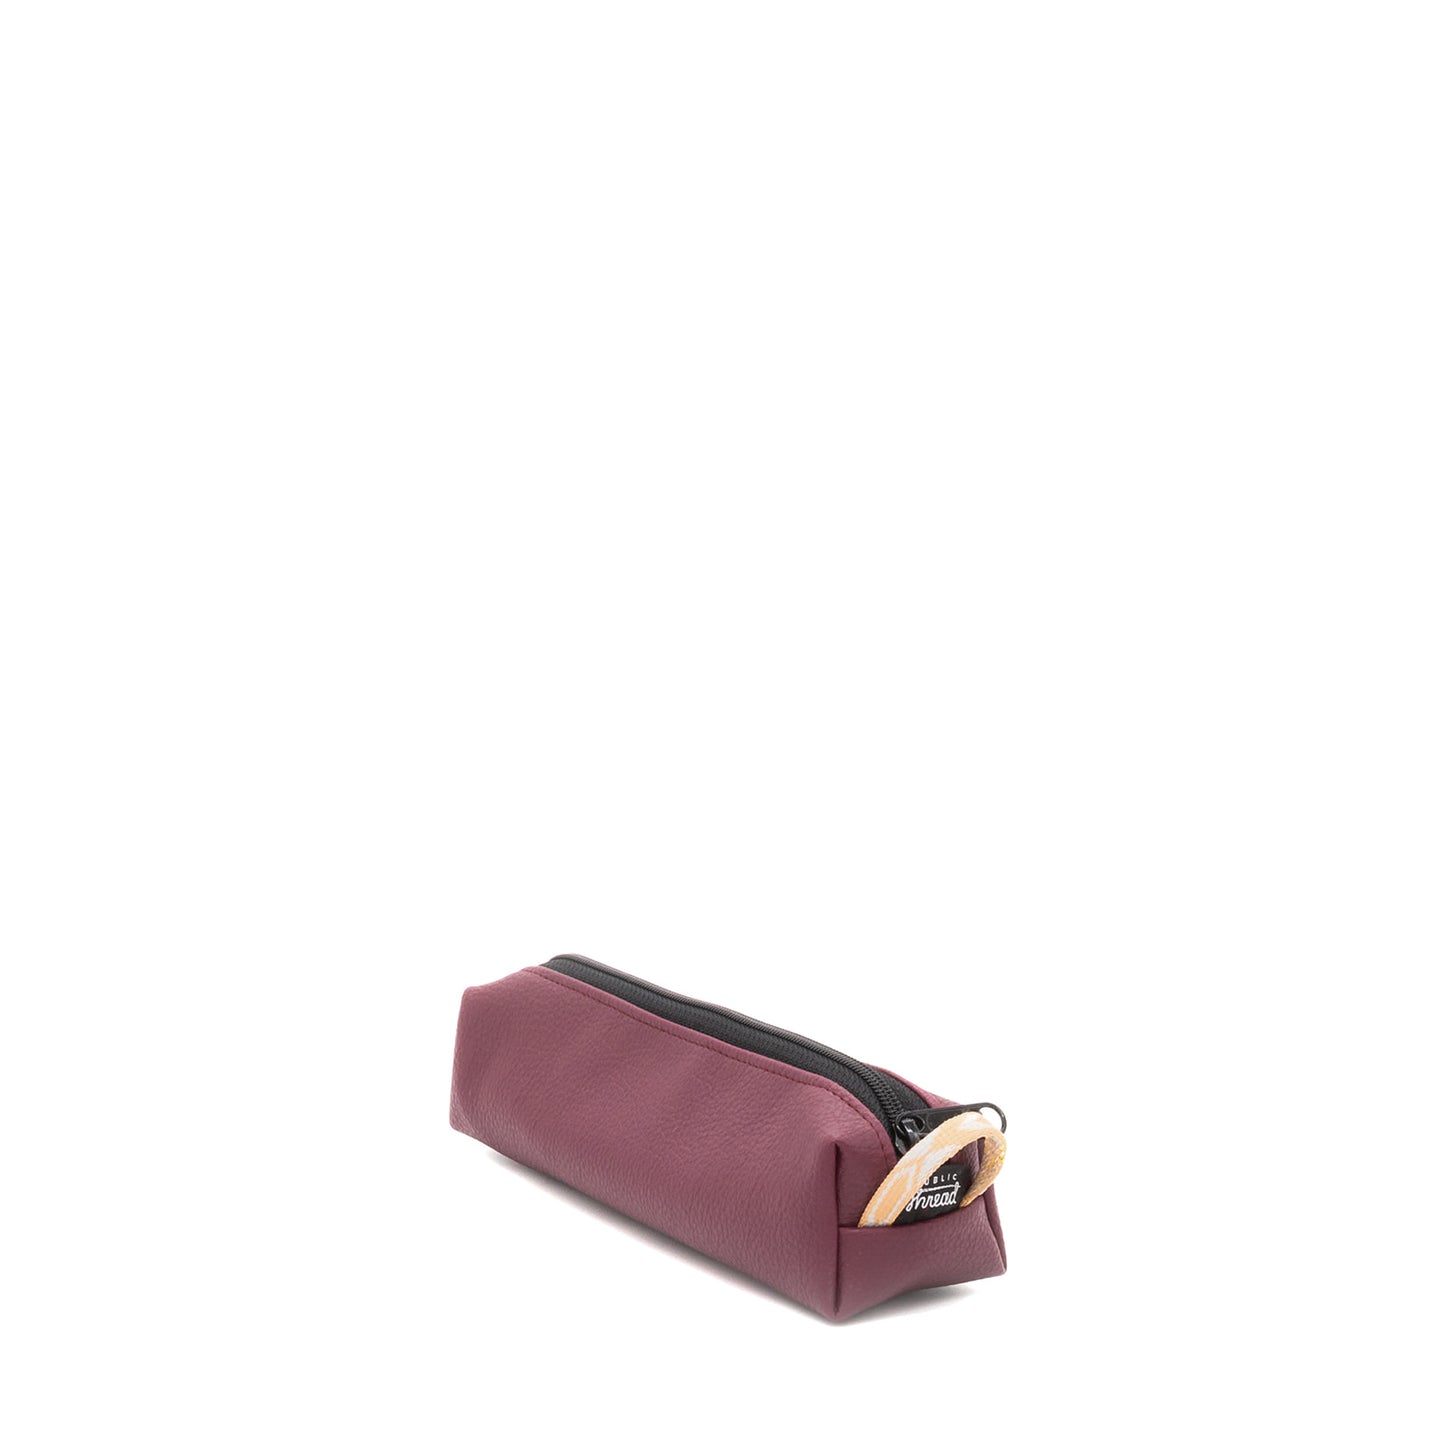 Upcycled Pencil Pouch - Burgundy